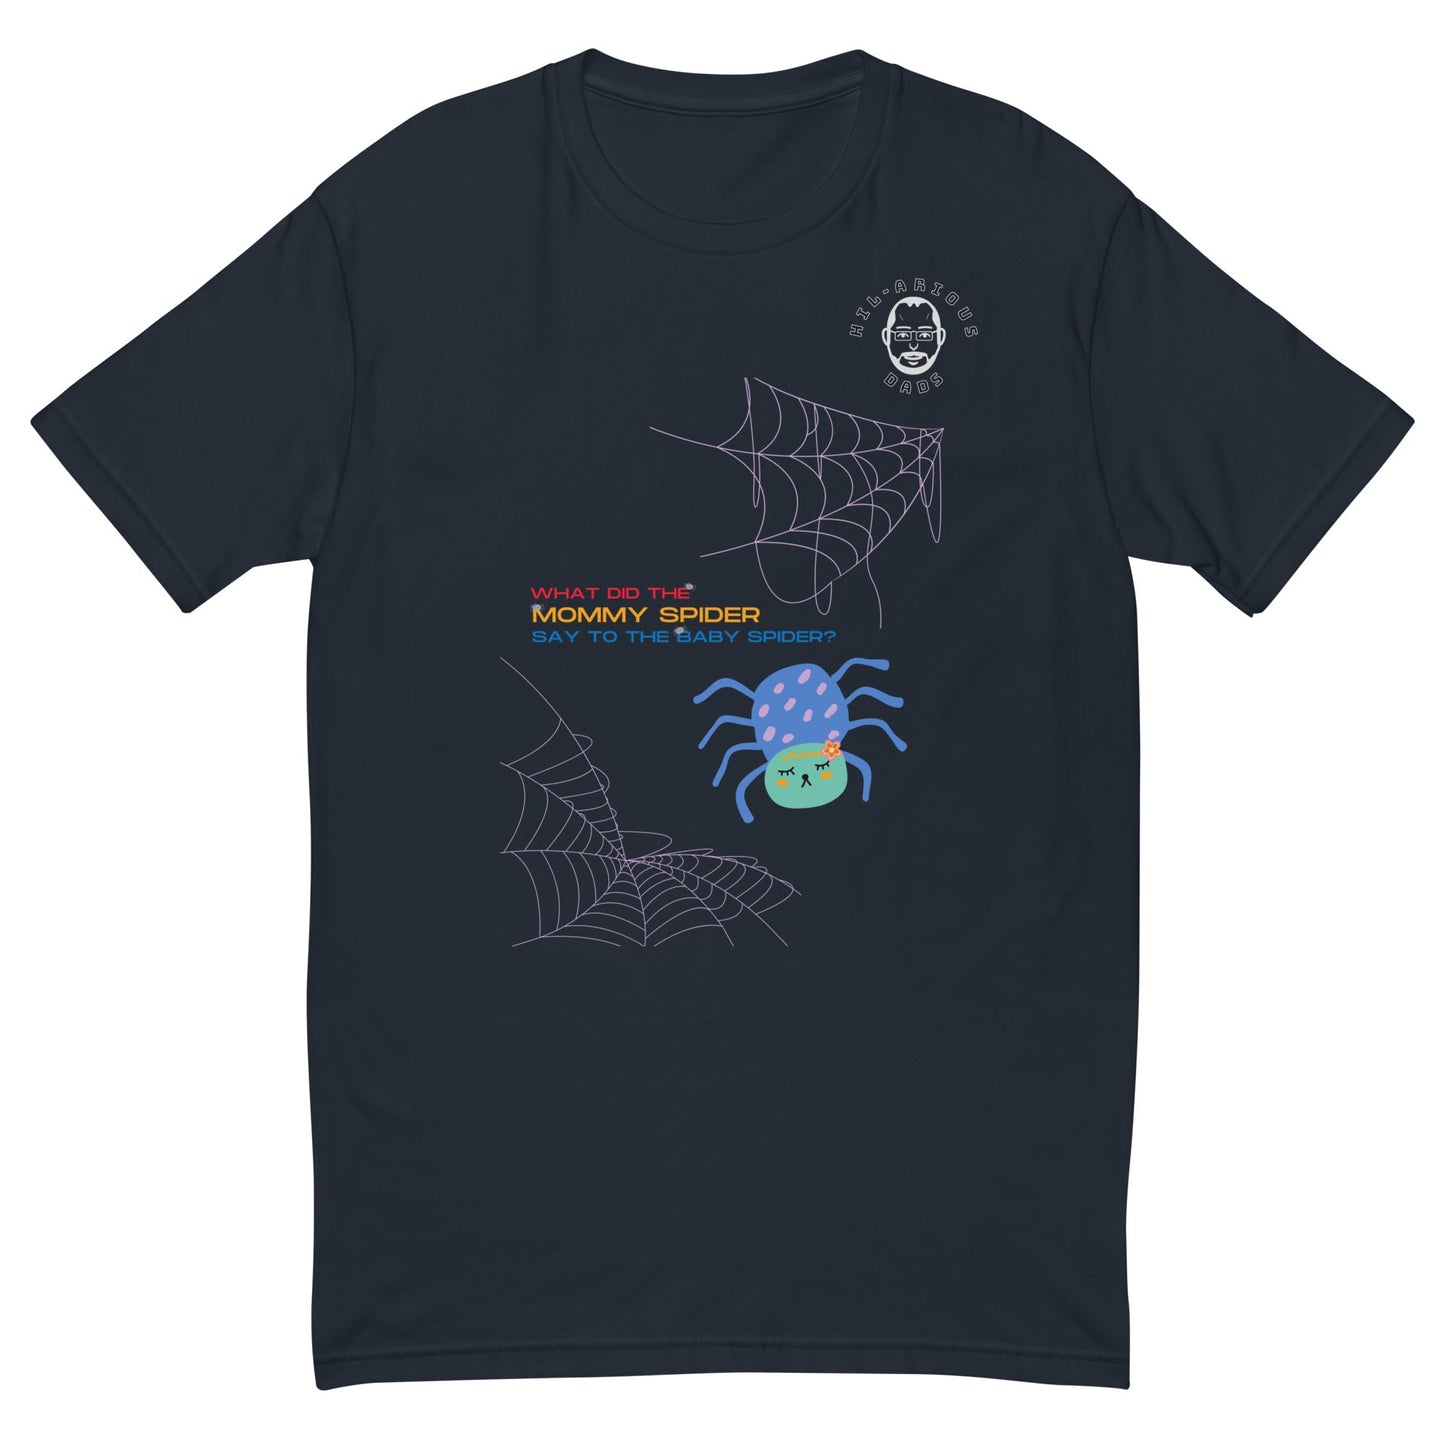 What did the Mommy spider say to the baby spider?-T-shirt - Hil-arious Dads